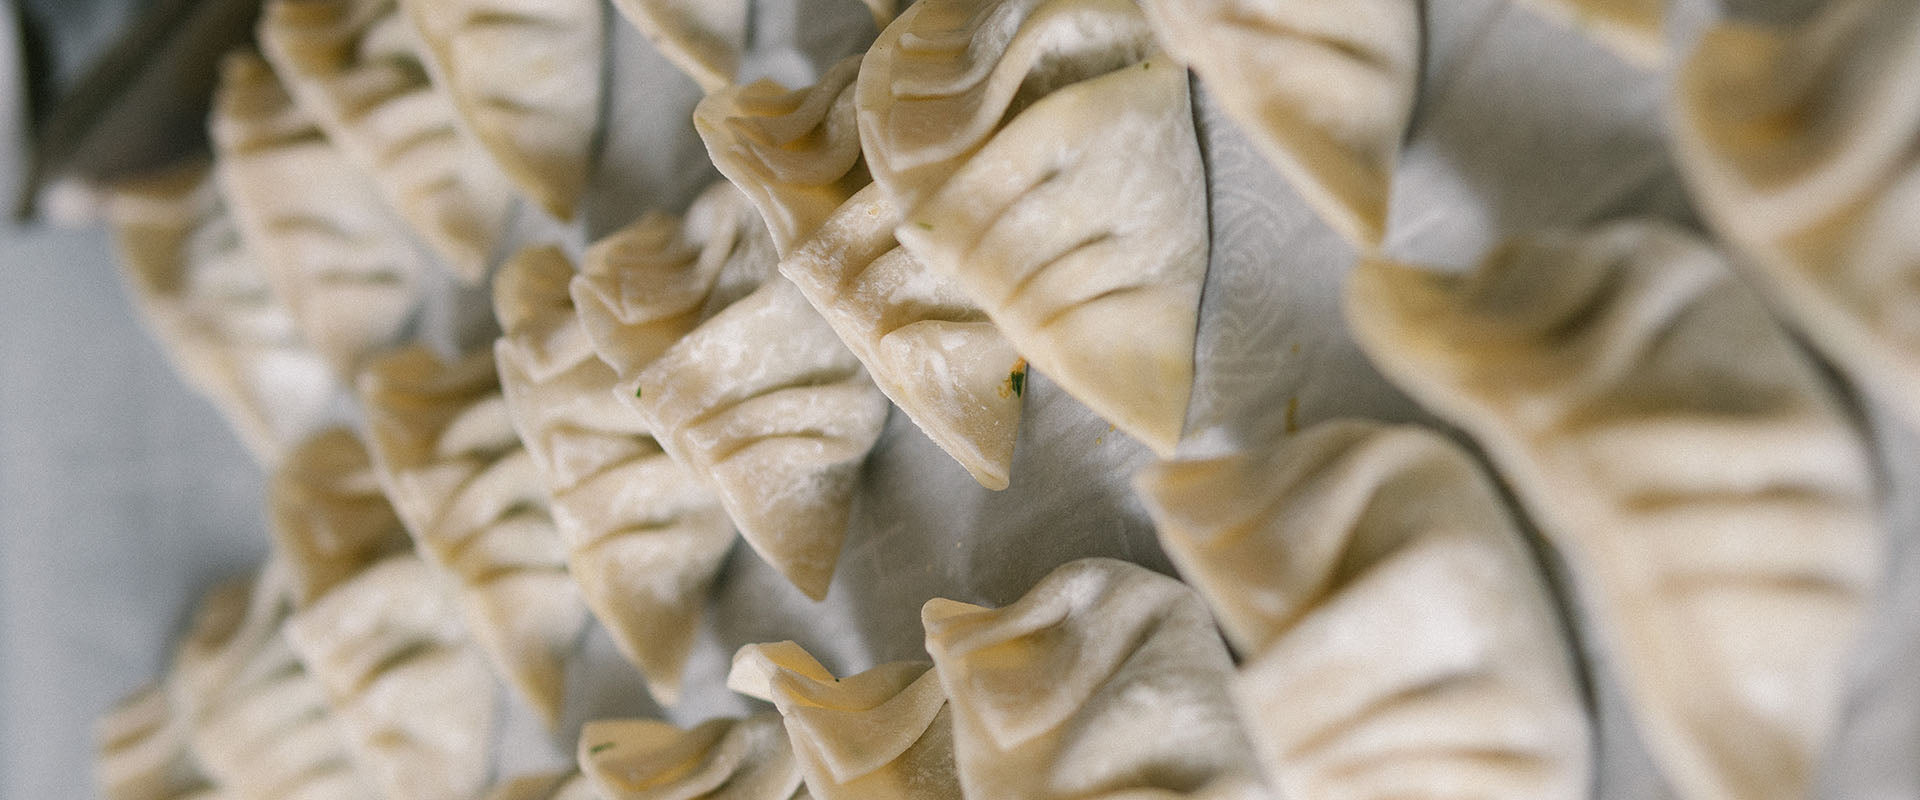 The Delicious World of Dumplings